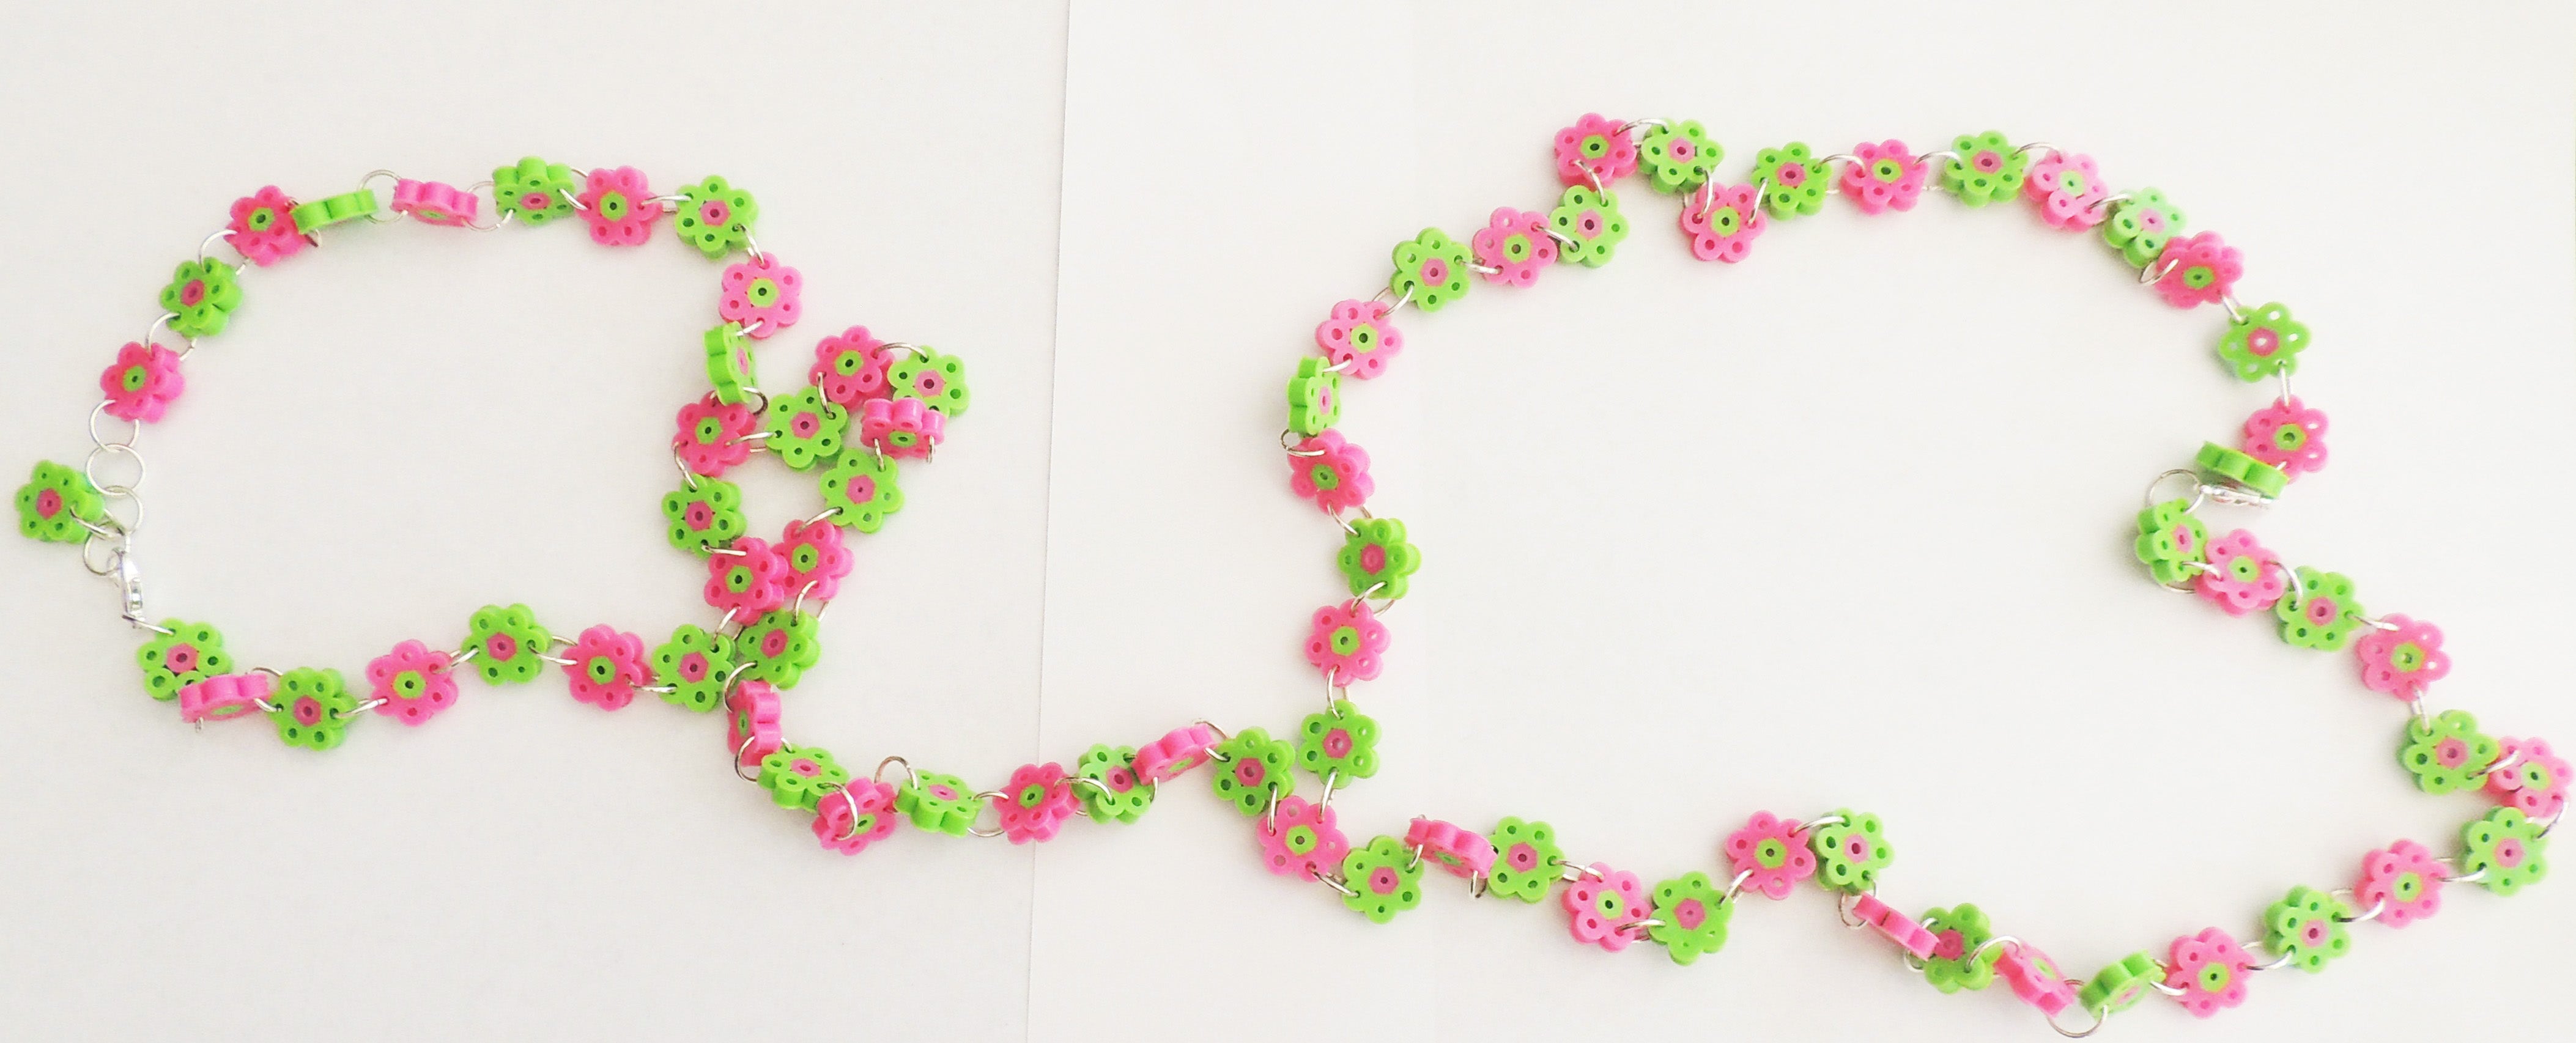 Daisy Chains, NYC, Los Angeles, Handmade, Kathleen, Boutique, Kathleen Los Angeles, Perler Beads, Body Harness